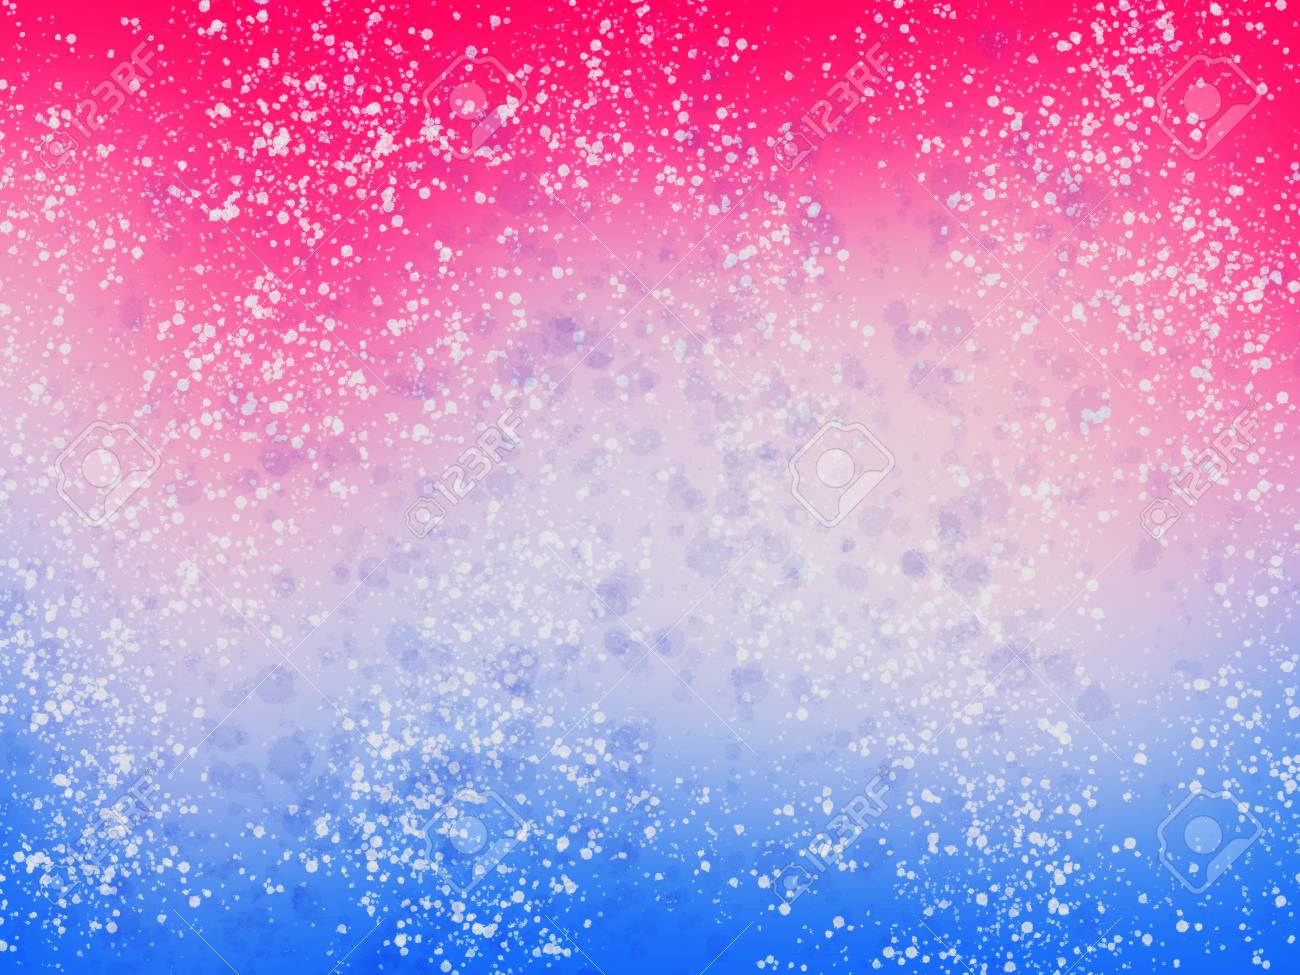 Blue And Pink Background With White Splashes Glitter Winter